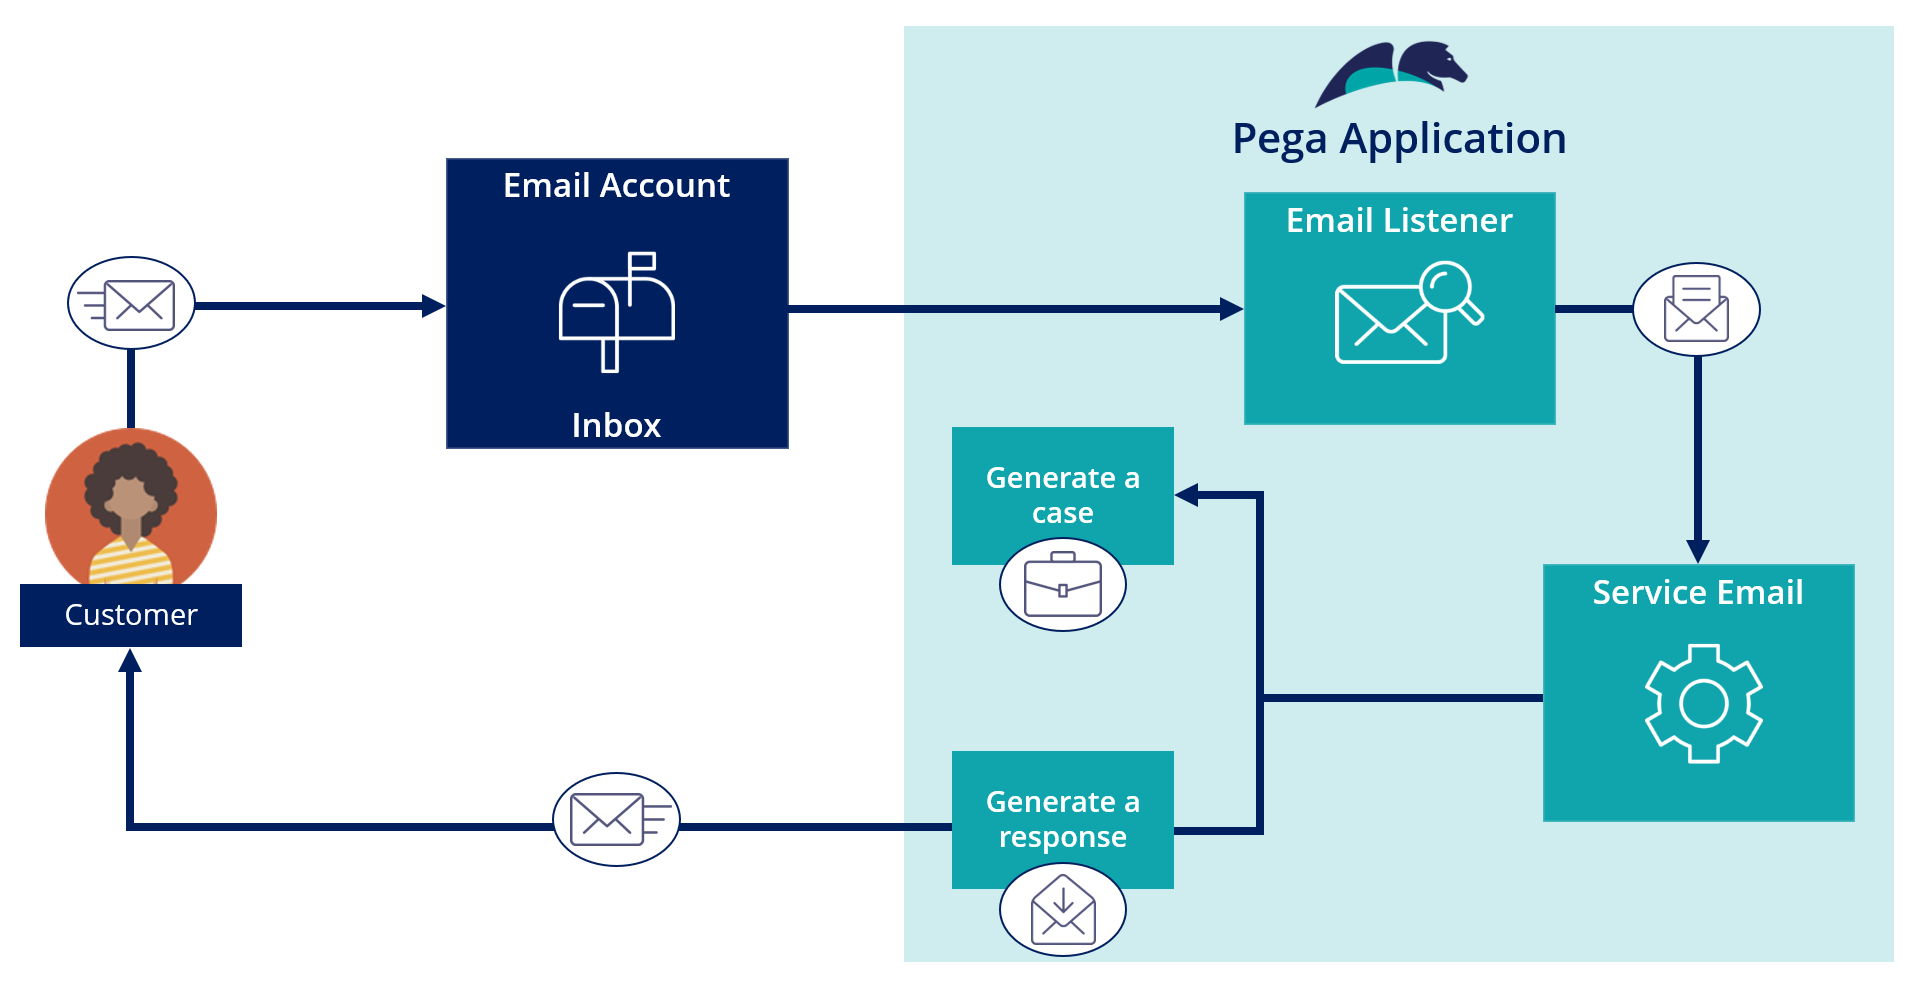 A diagram showing the major components of email integration in Pega.